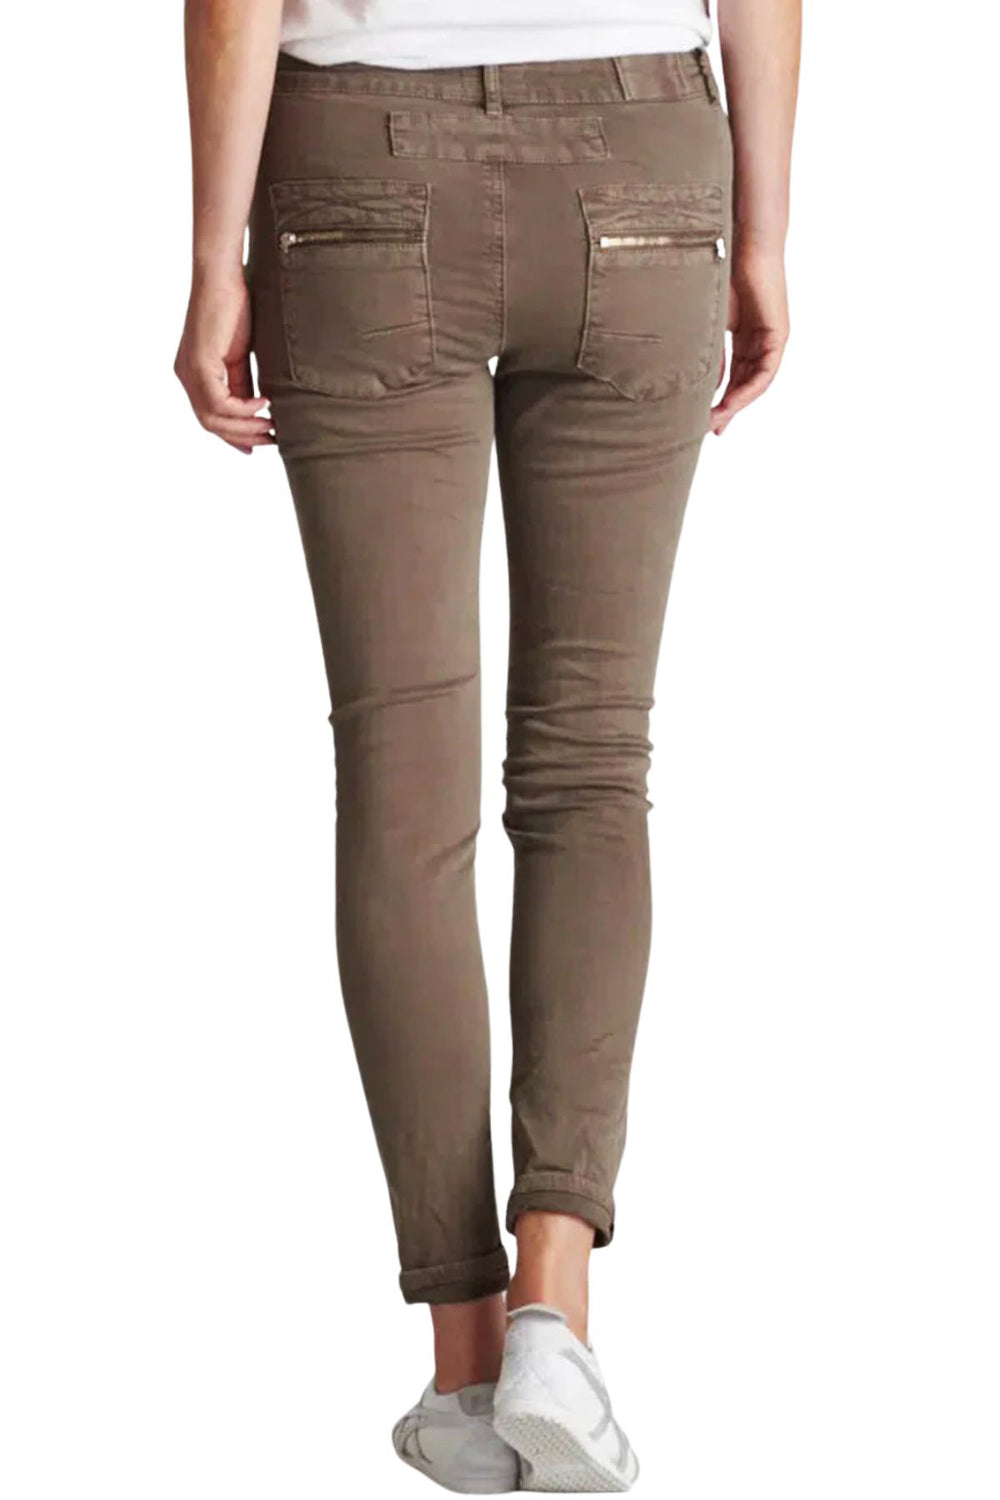 Make a statement with a difference wearing the Classic Button Jeans in chocolate by Italian Star. These denim jeans double as a casual and smart pant with an added touch of Pizazz through the zip and button detail. With a mid rise waist, pockets and tapered leg these pants are going to fit you to perfection! Brand: Italian Star Style Code: 8123 Colour: Chocolate Material: 98% Cotton 2% Elastane Care: Machine wash Zip and button fly front Side pockets Zip back pockets Seam detail at knees Designed to fade